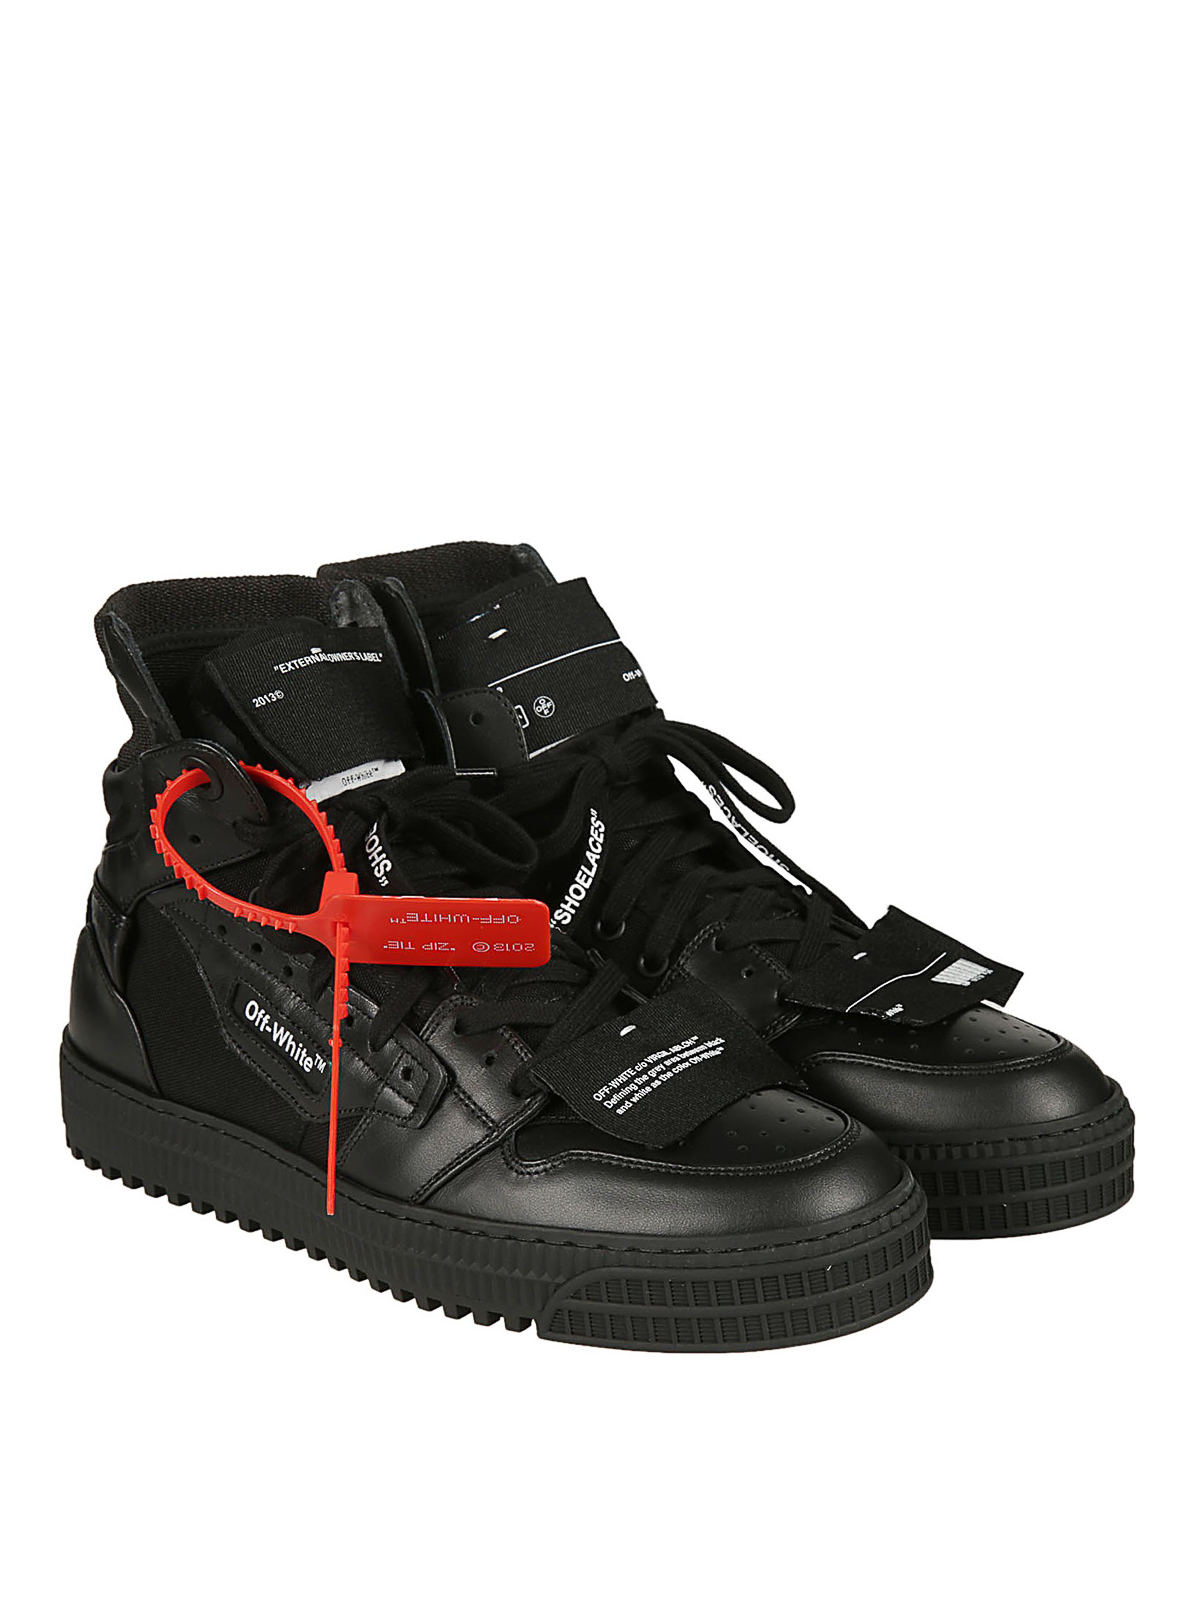 off white high top black